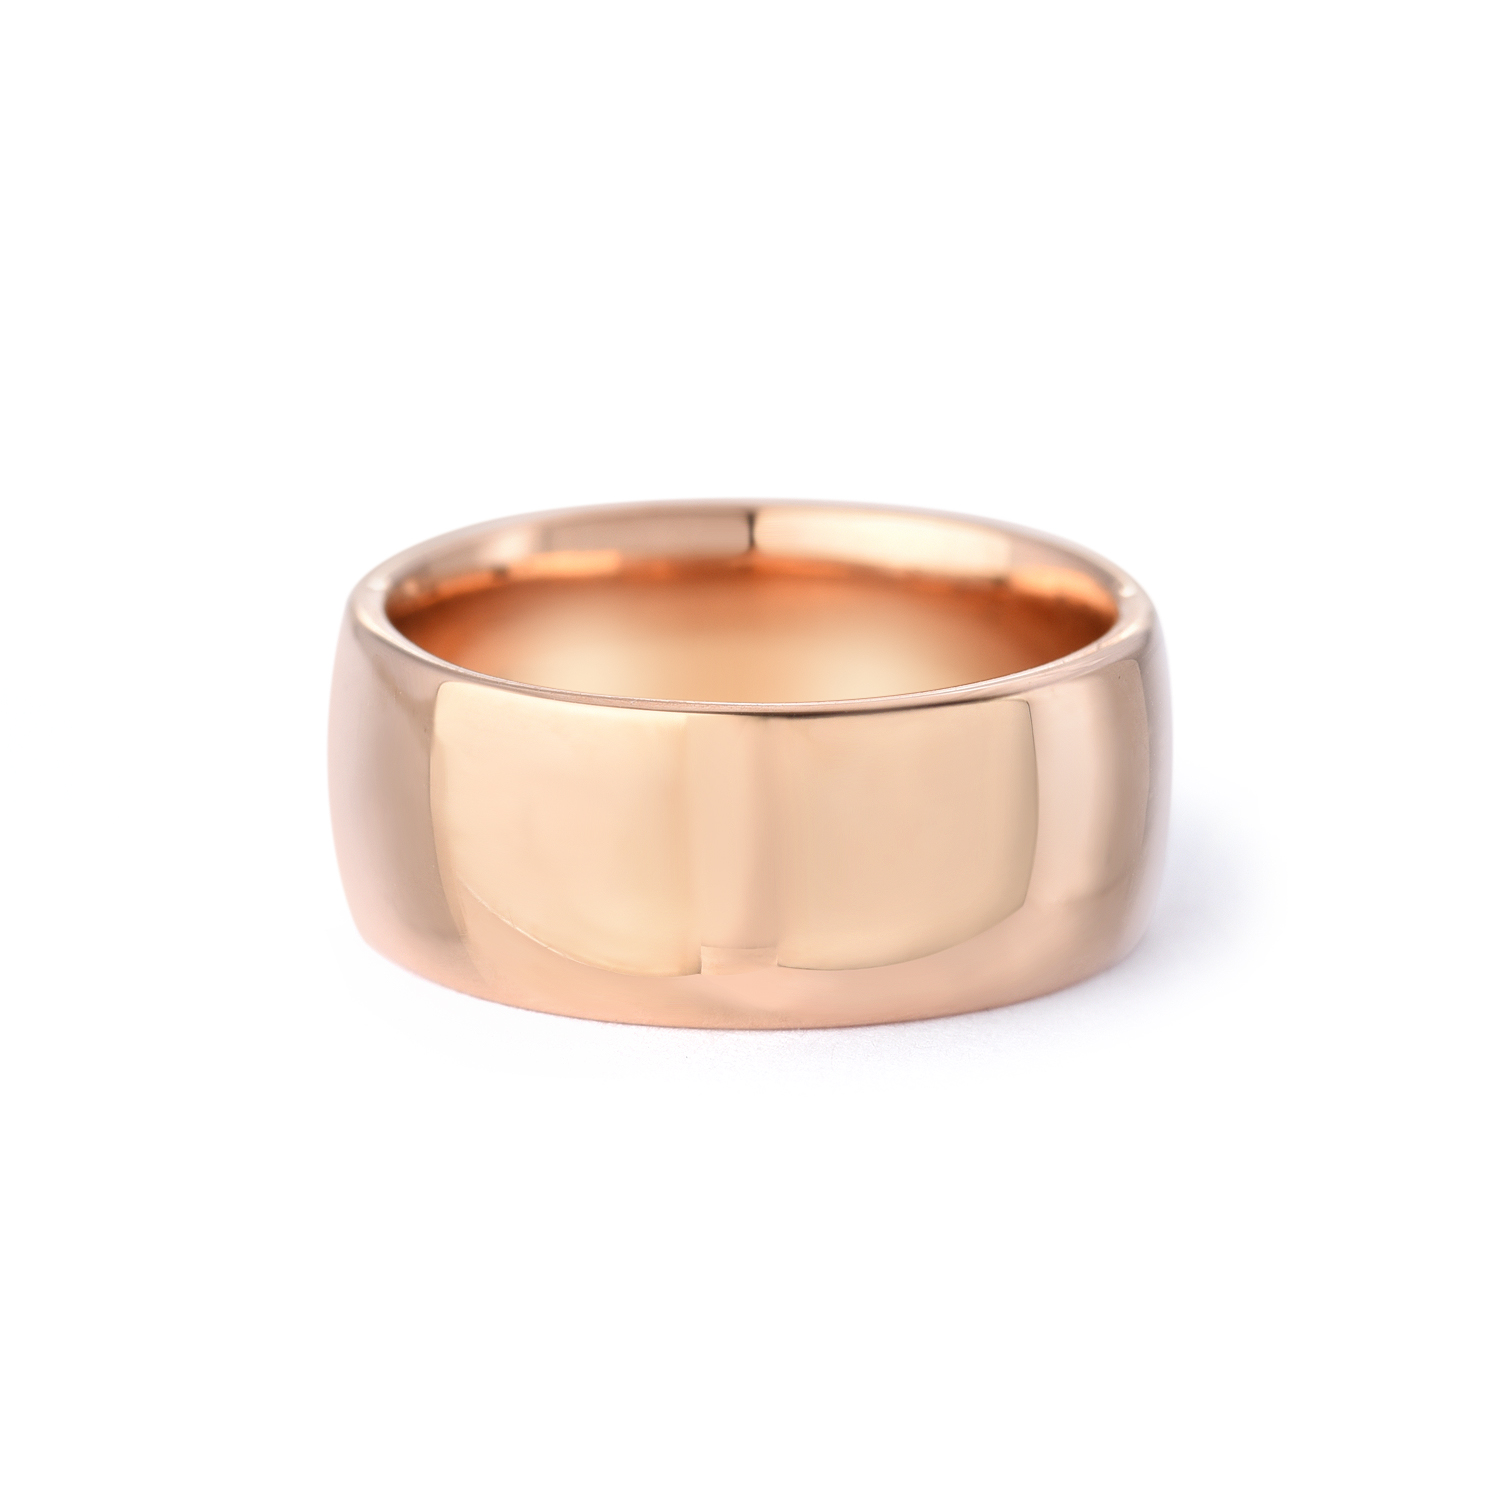 Wedding Ring: Jewelry that makes Emily feel strong